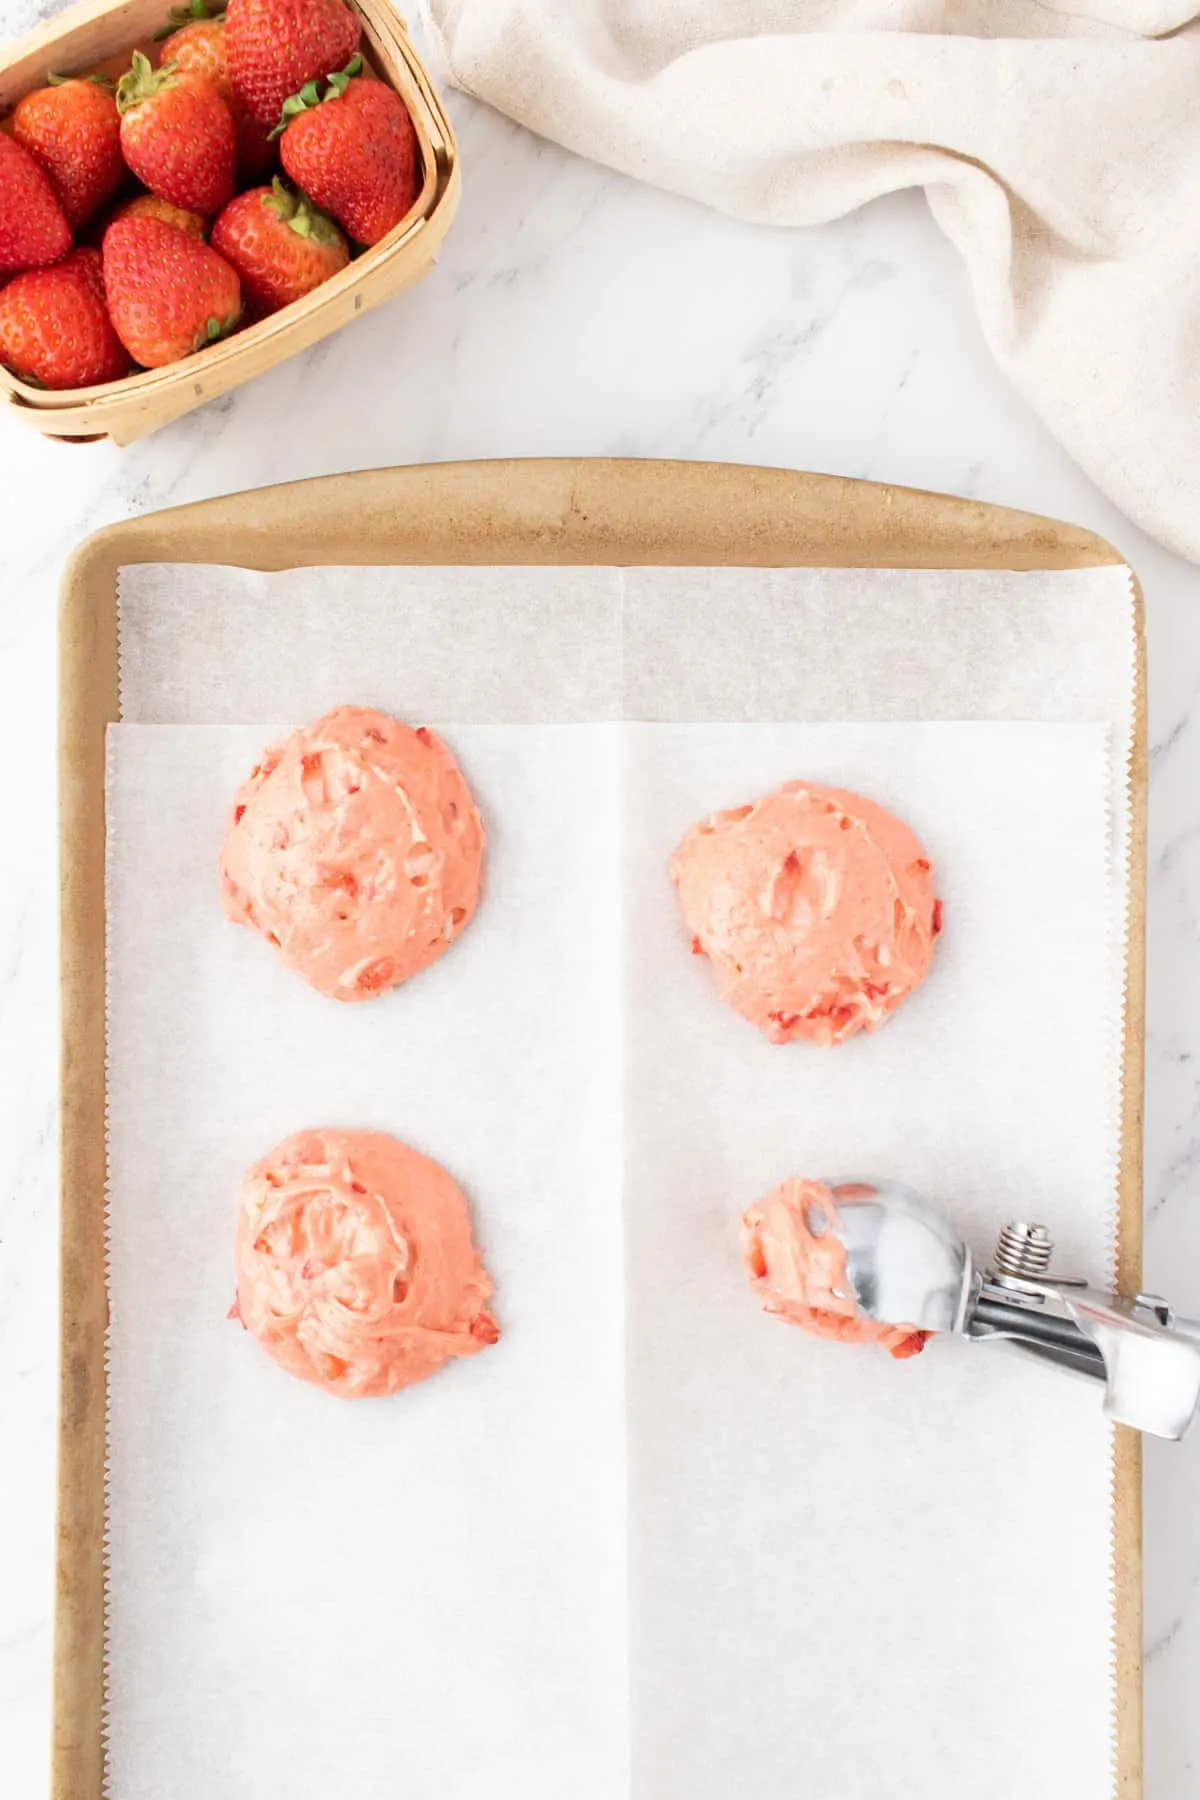 strawberry cookie dough being scooped onto parchment lined baking sheet